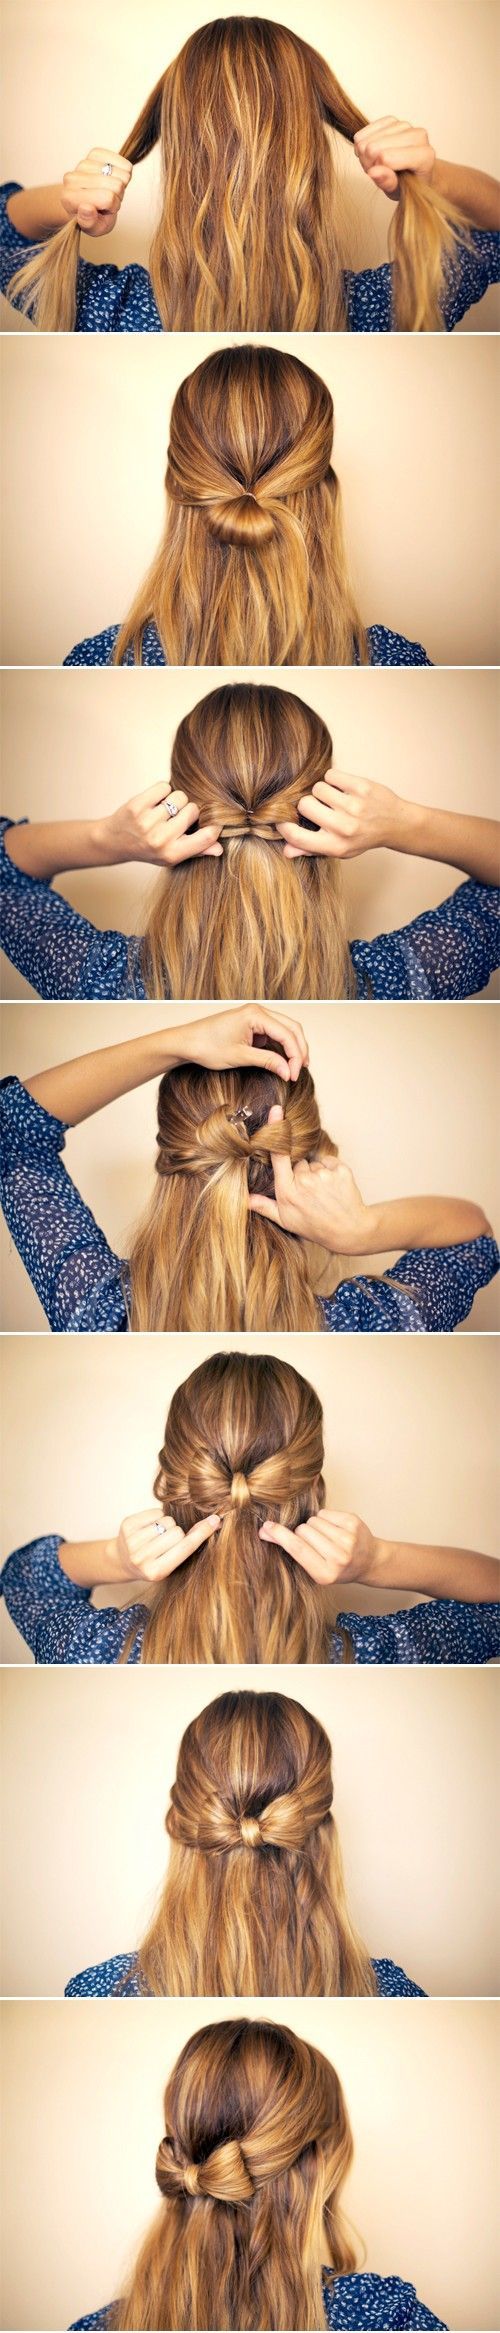 17 Quick And Easy #DIY #Hairstyle #Tutorials